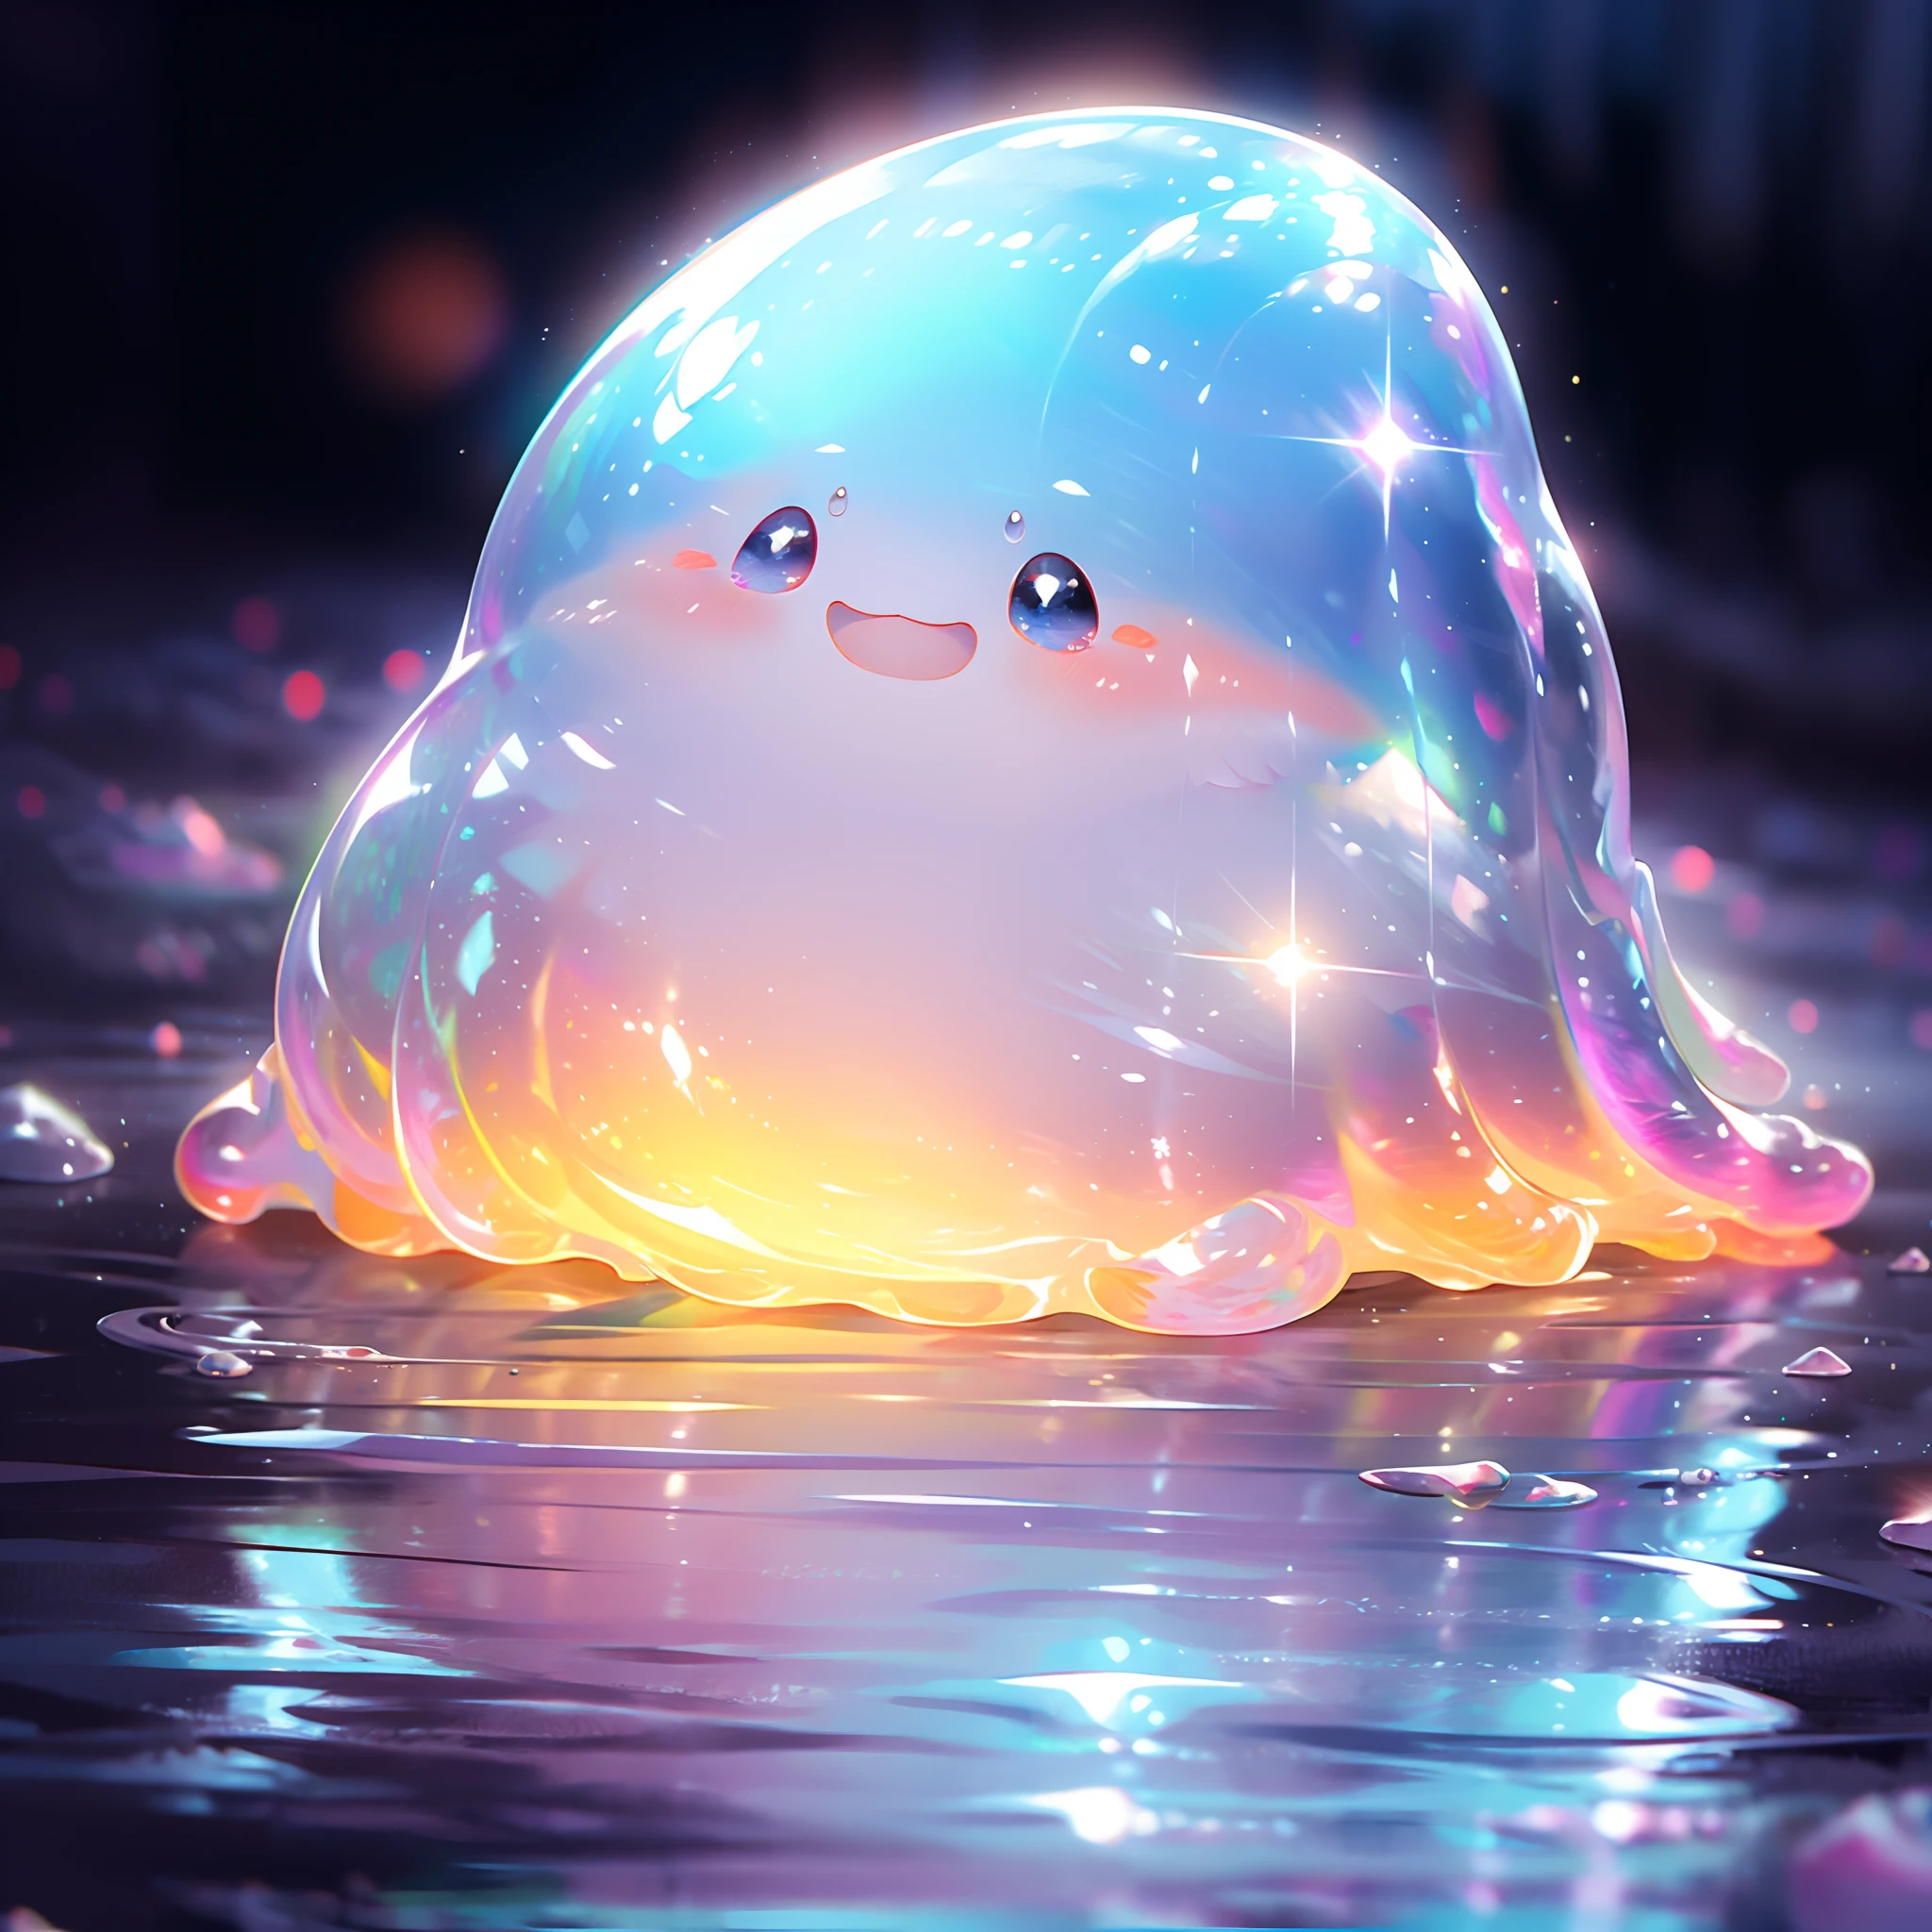 Glossy iridescent colorful slime, Cute face,Vivid and translucent texture, Slime stretch and squash, Detailed, Seductive patterns and swirl, Sparkling and reflected light, Fun to touch and play with, A masterpiece of high resolution, Vivid colors, Illuminated by soft studio lighting.